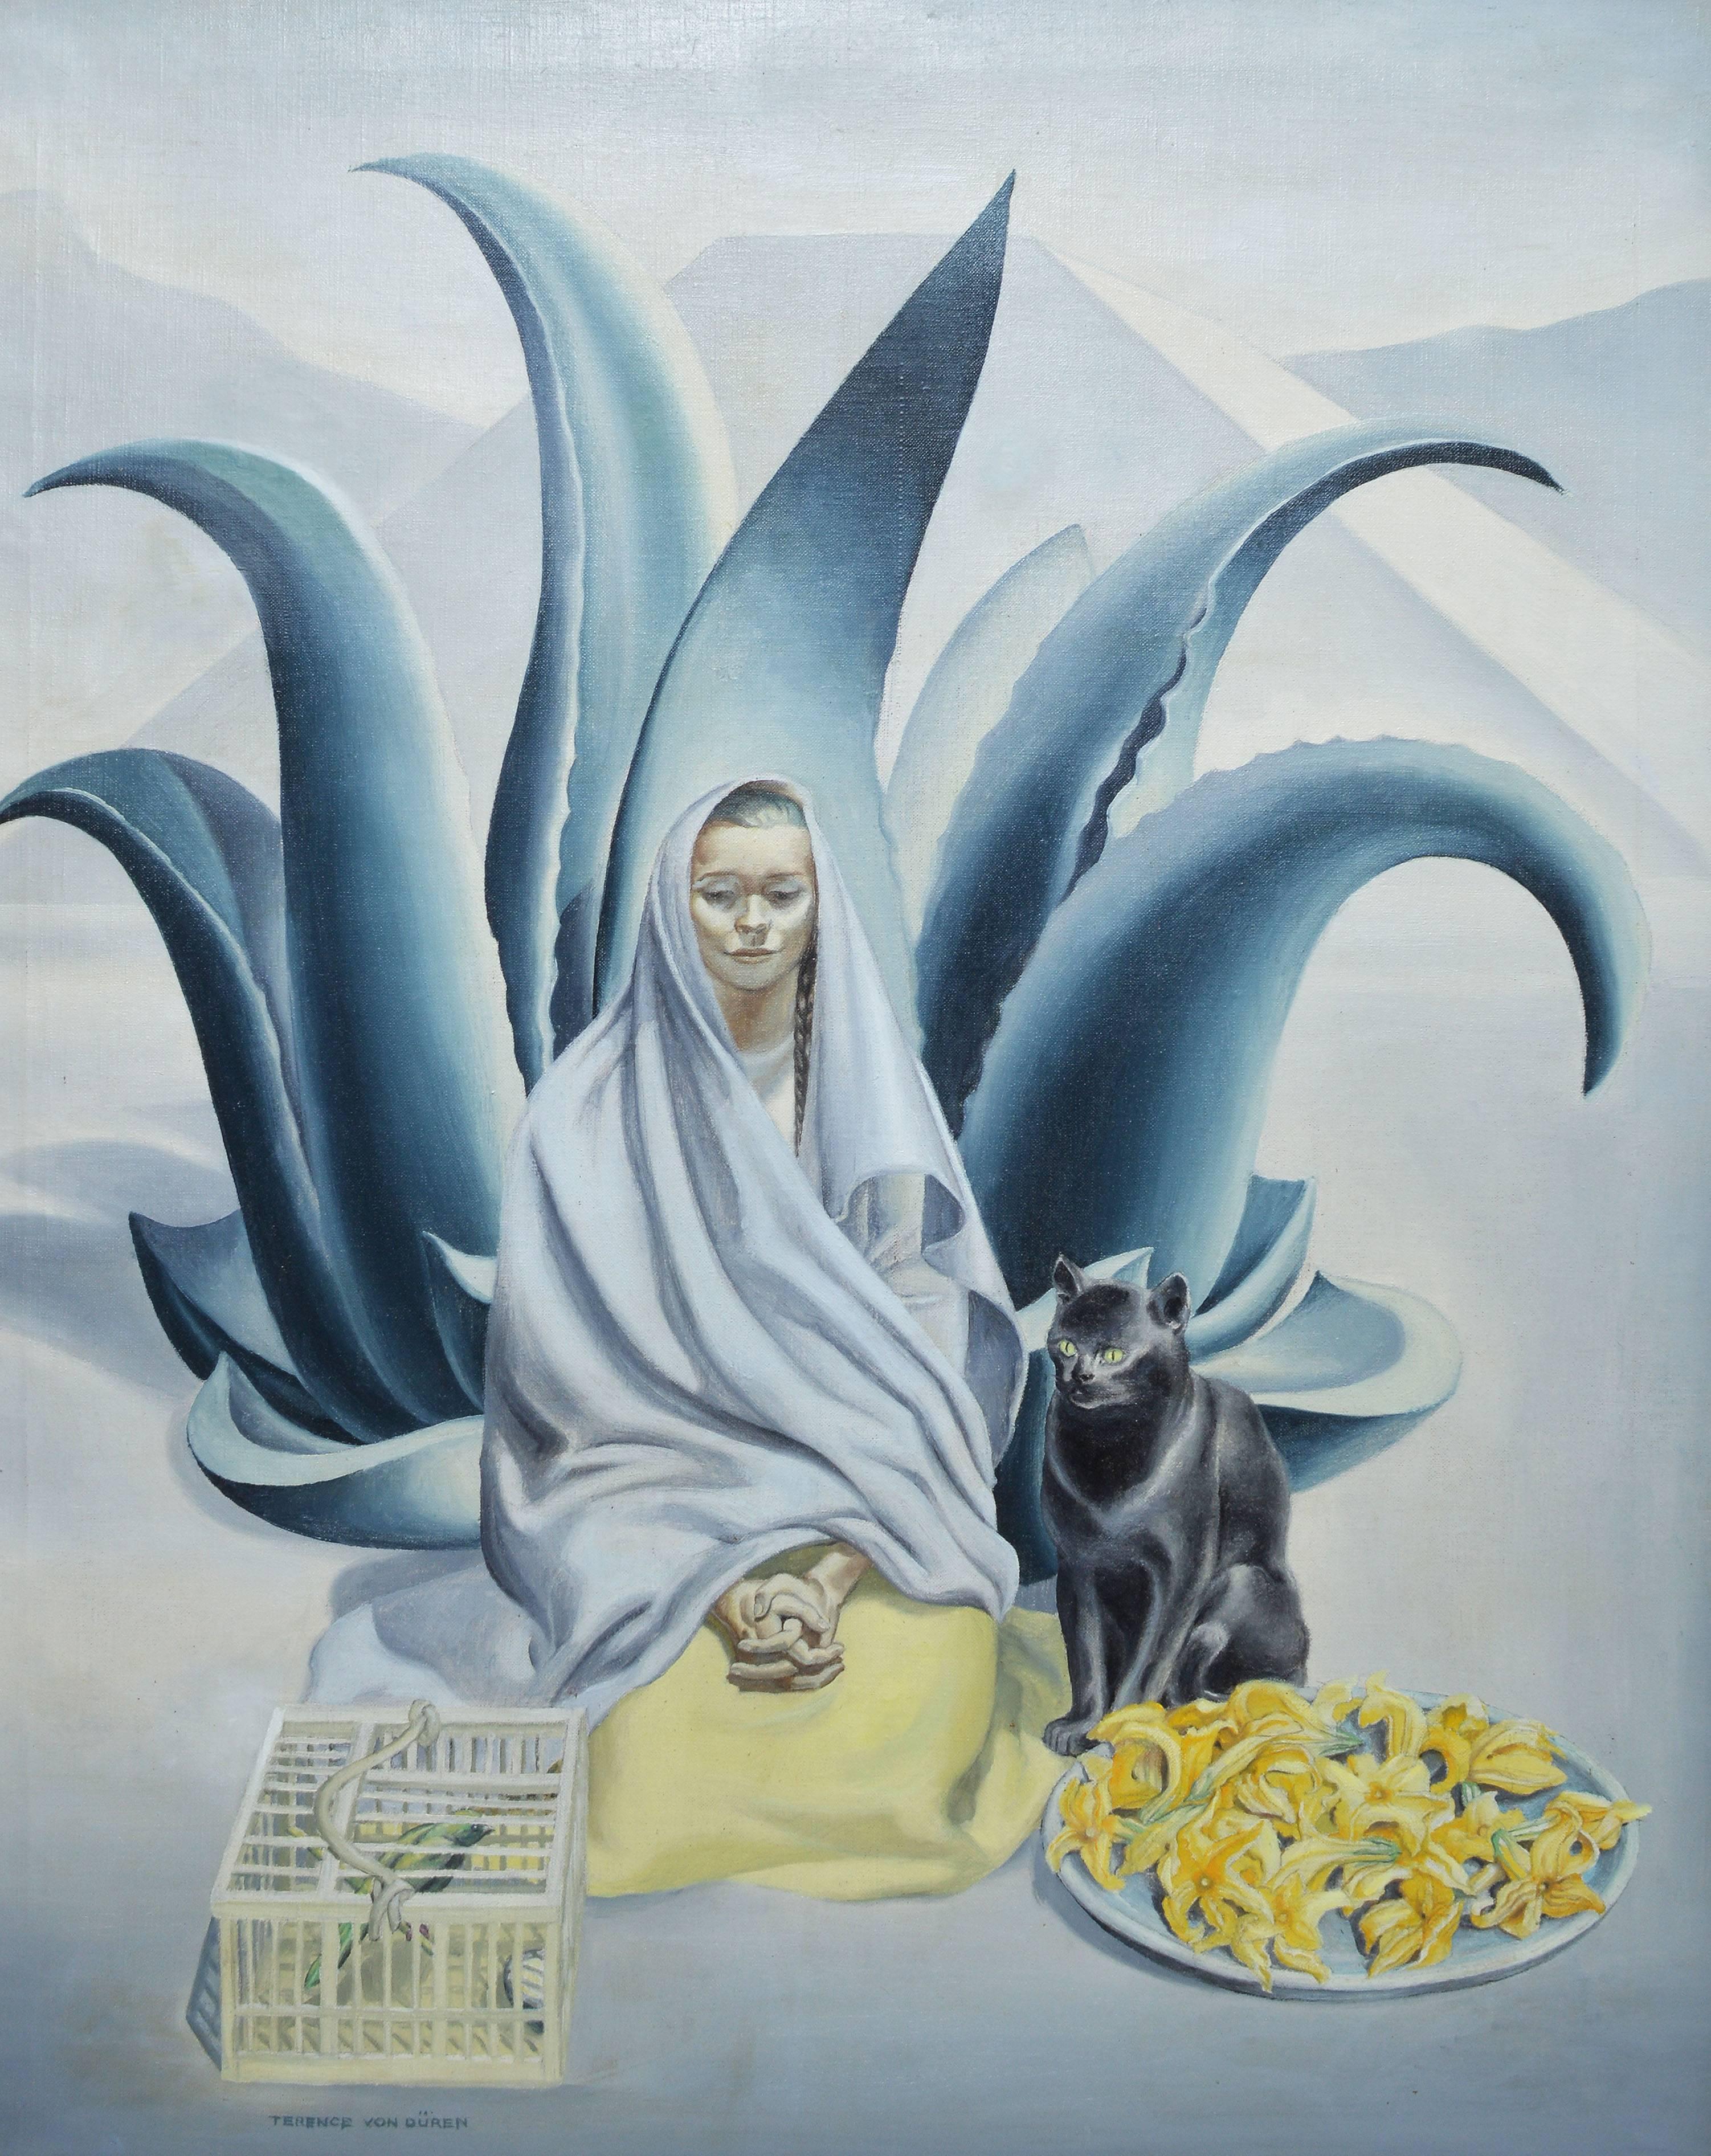 Surrealist portrait of a woman in a modernist landscape by Terence Duren  (1906 - 1968).  Oil on canvas, circa 1935.  Signed lower left.  Displayed in a period art deco frame.  Image size, 28